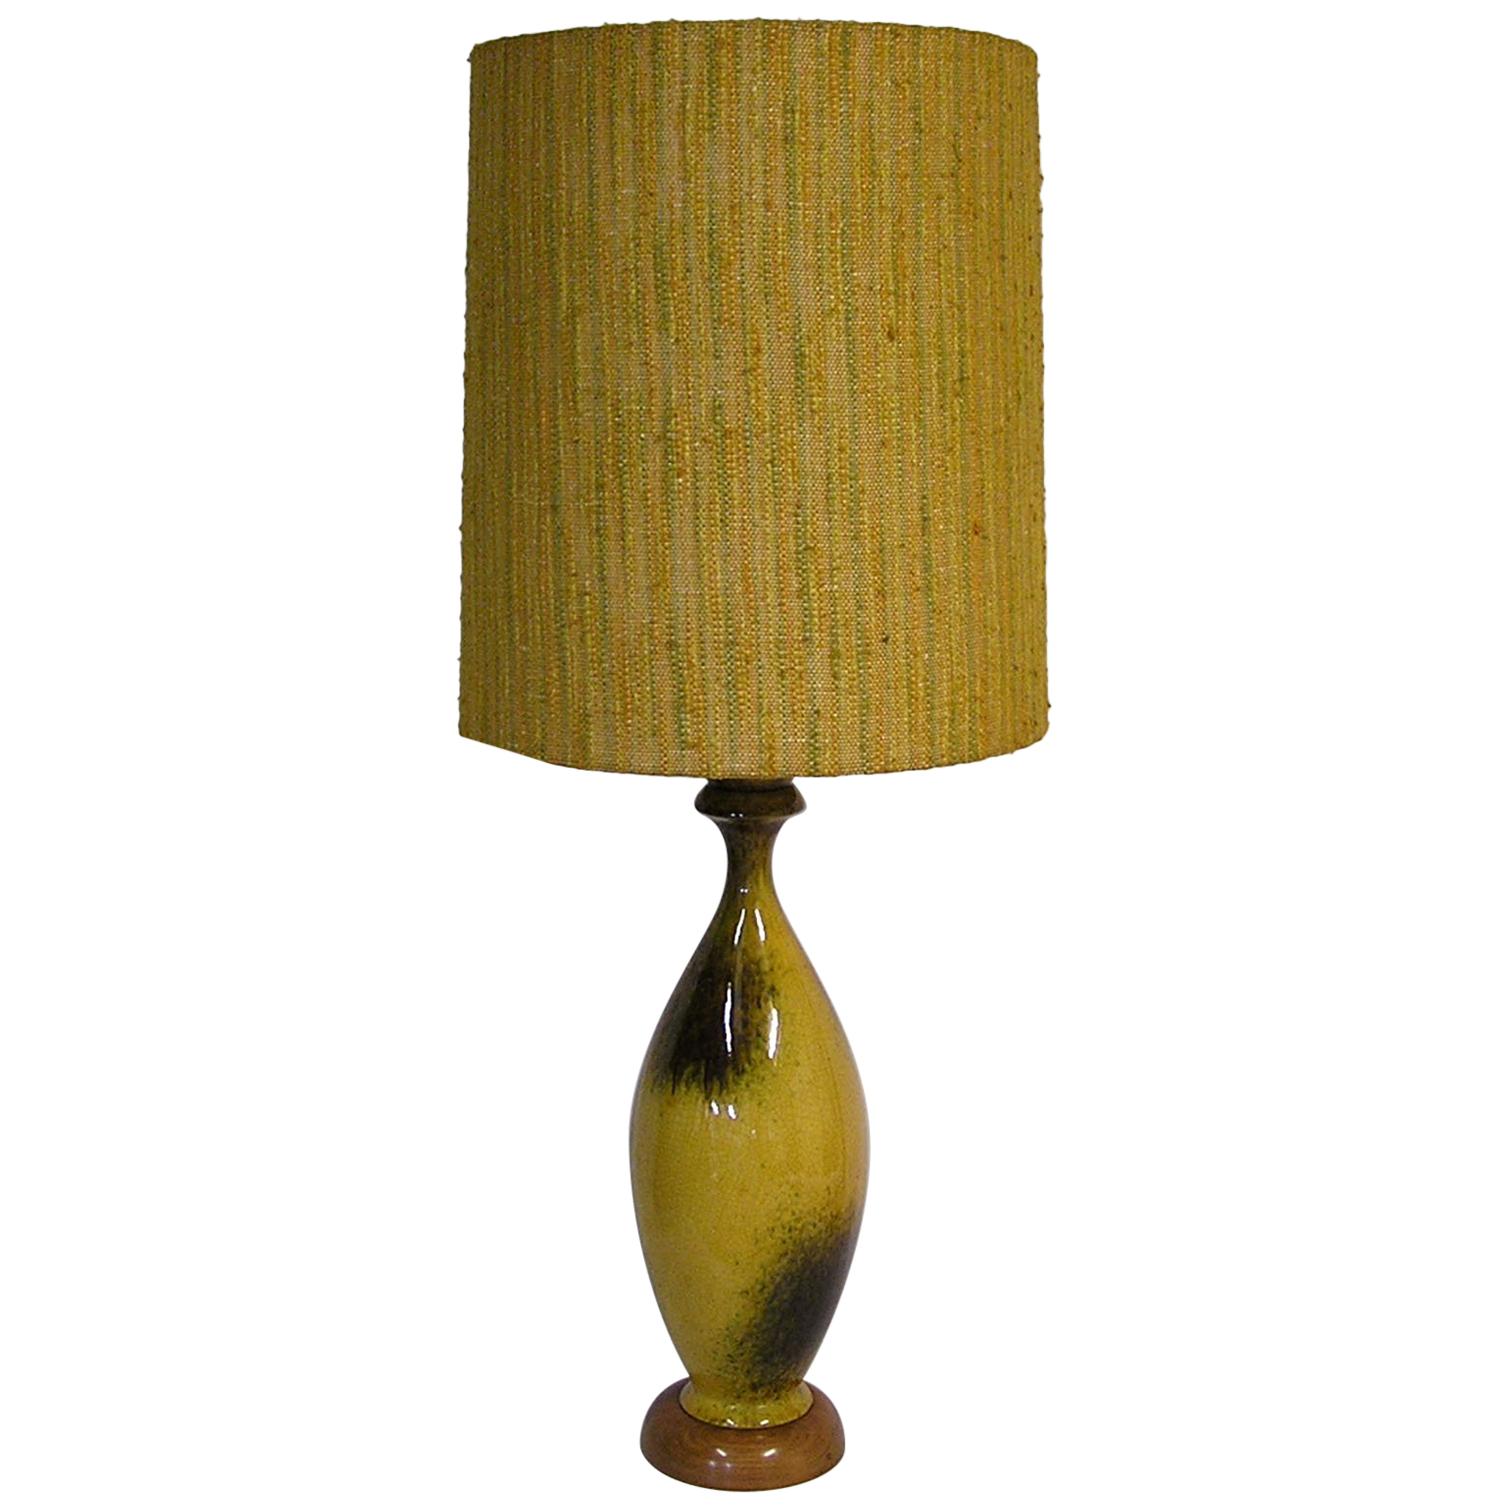 1950s-1960s Large Mid-Century Modern Ceramic Pottery Lamp For Sale